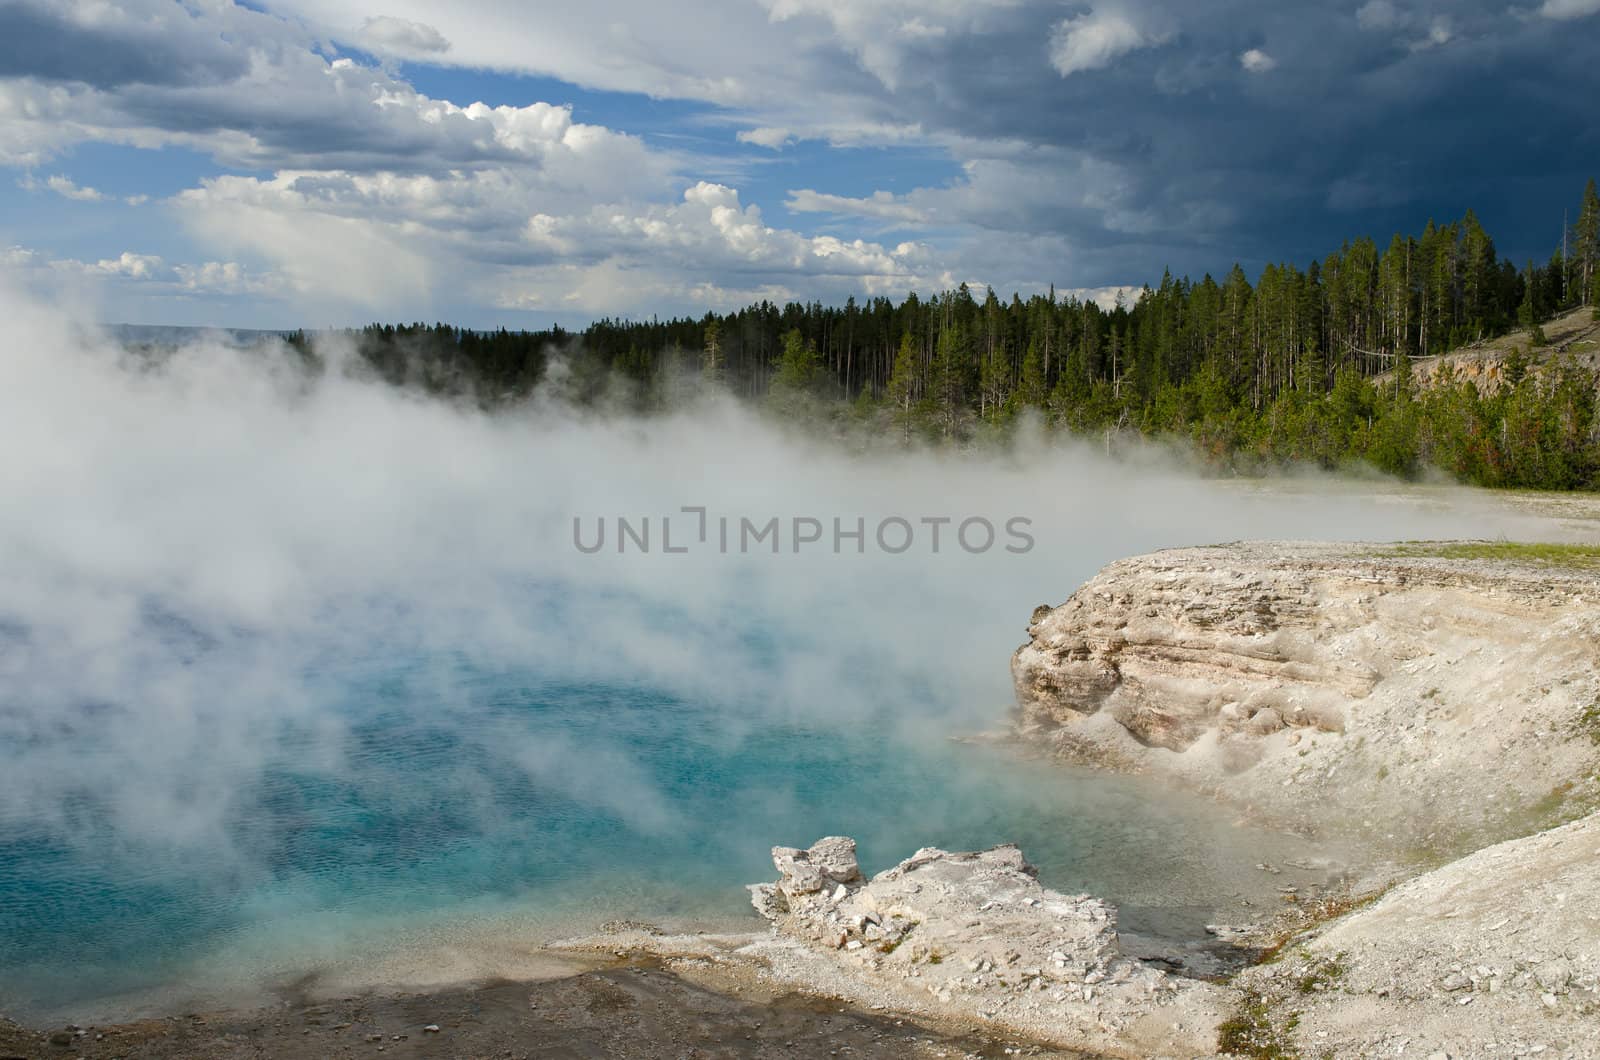 Excelsior Geyser, Lodgepole Pine (Pinus contorta) forest and storm clouds, Yellowstone National Park, Park County, Wyoming, USA by CharlesBolin